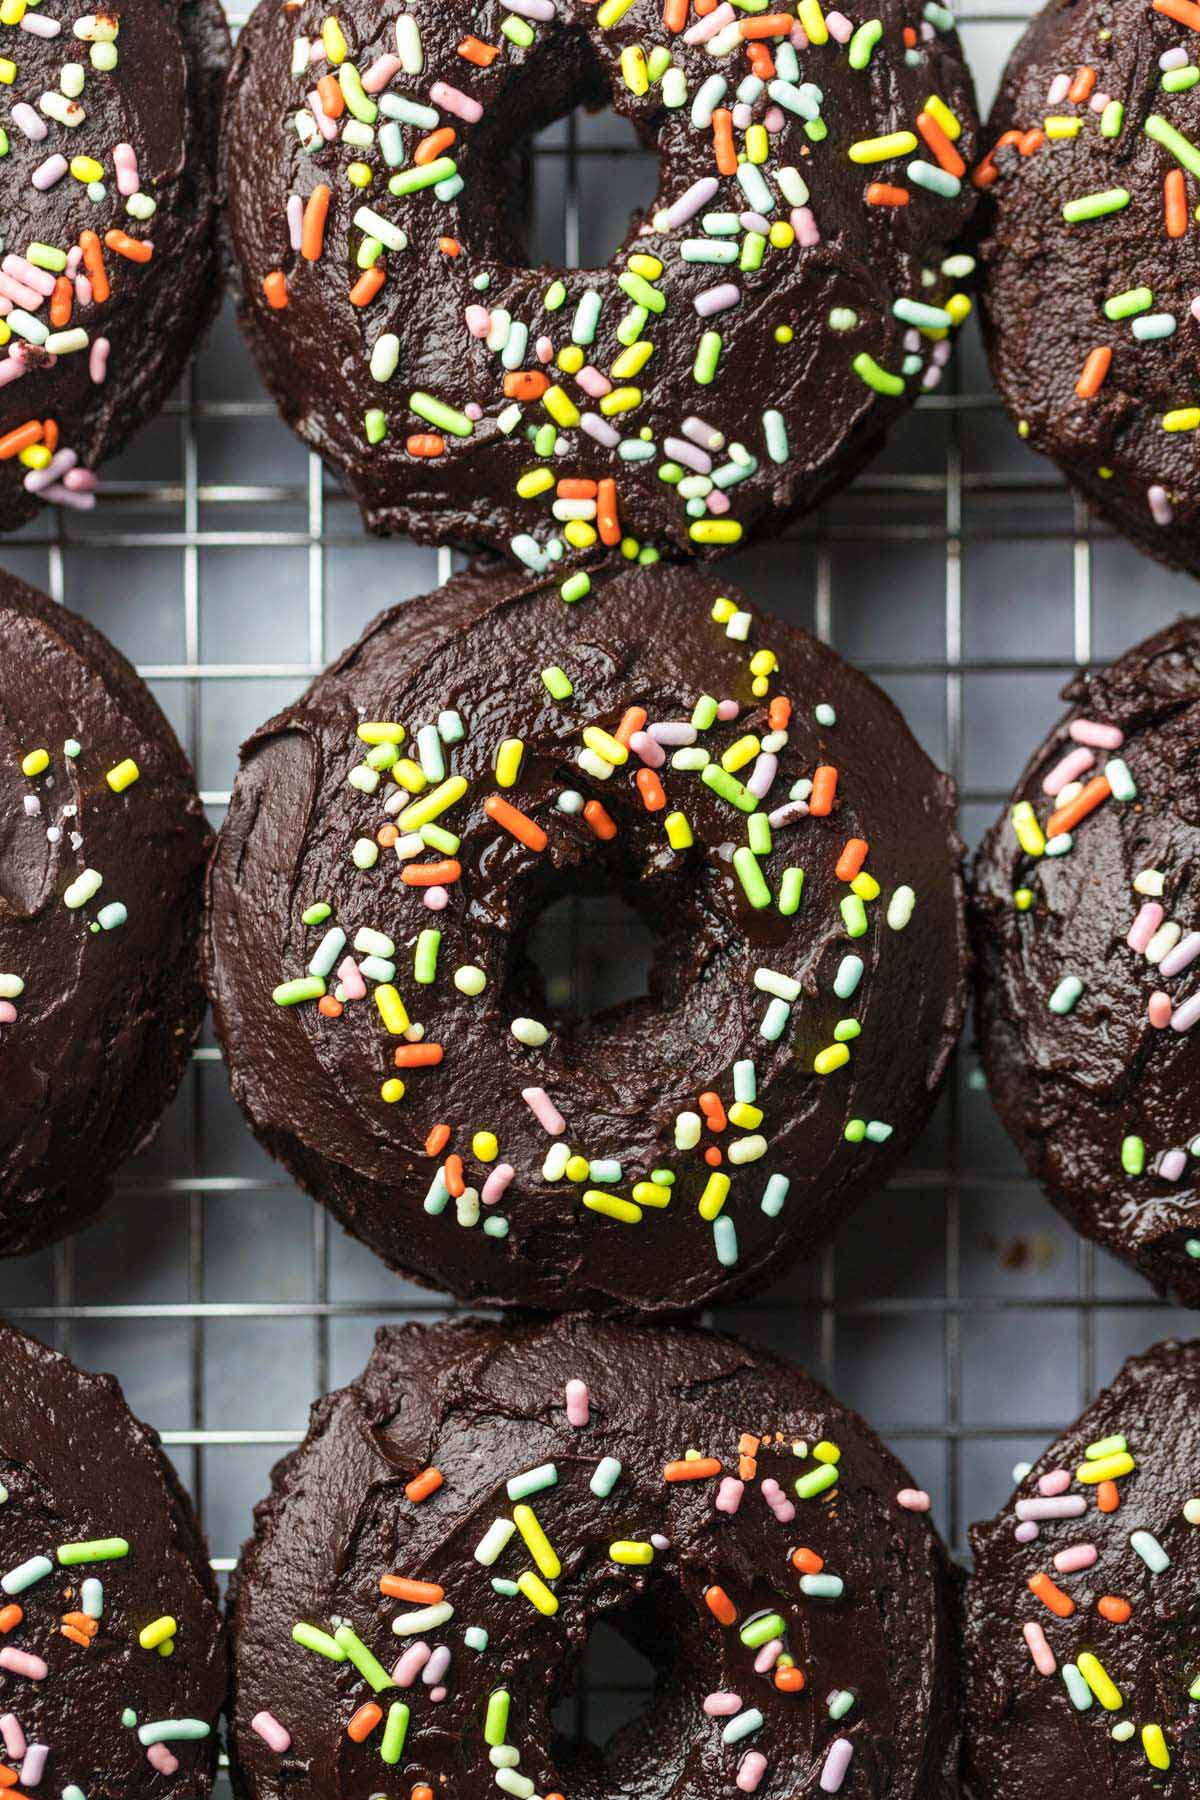 baked chocolate donuts with sprinkles up close. 